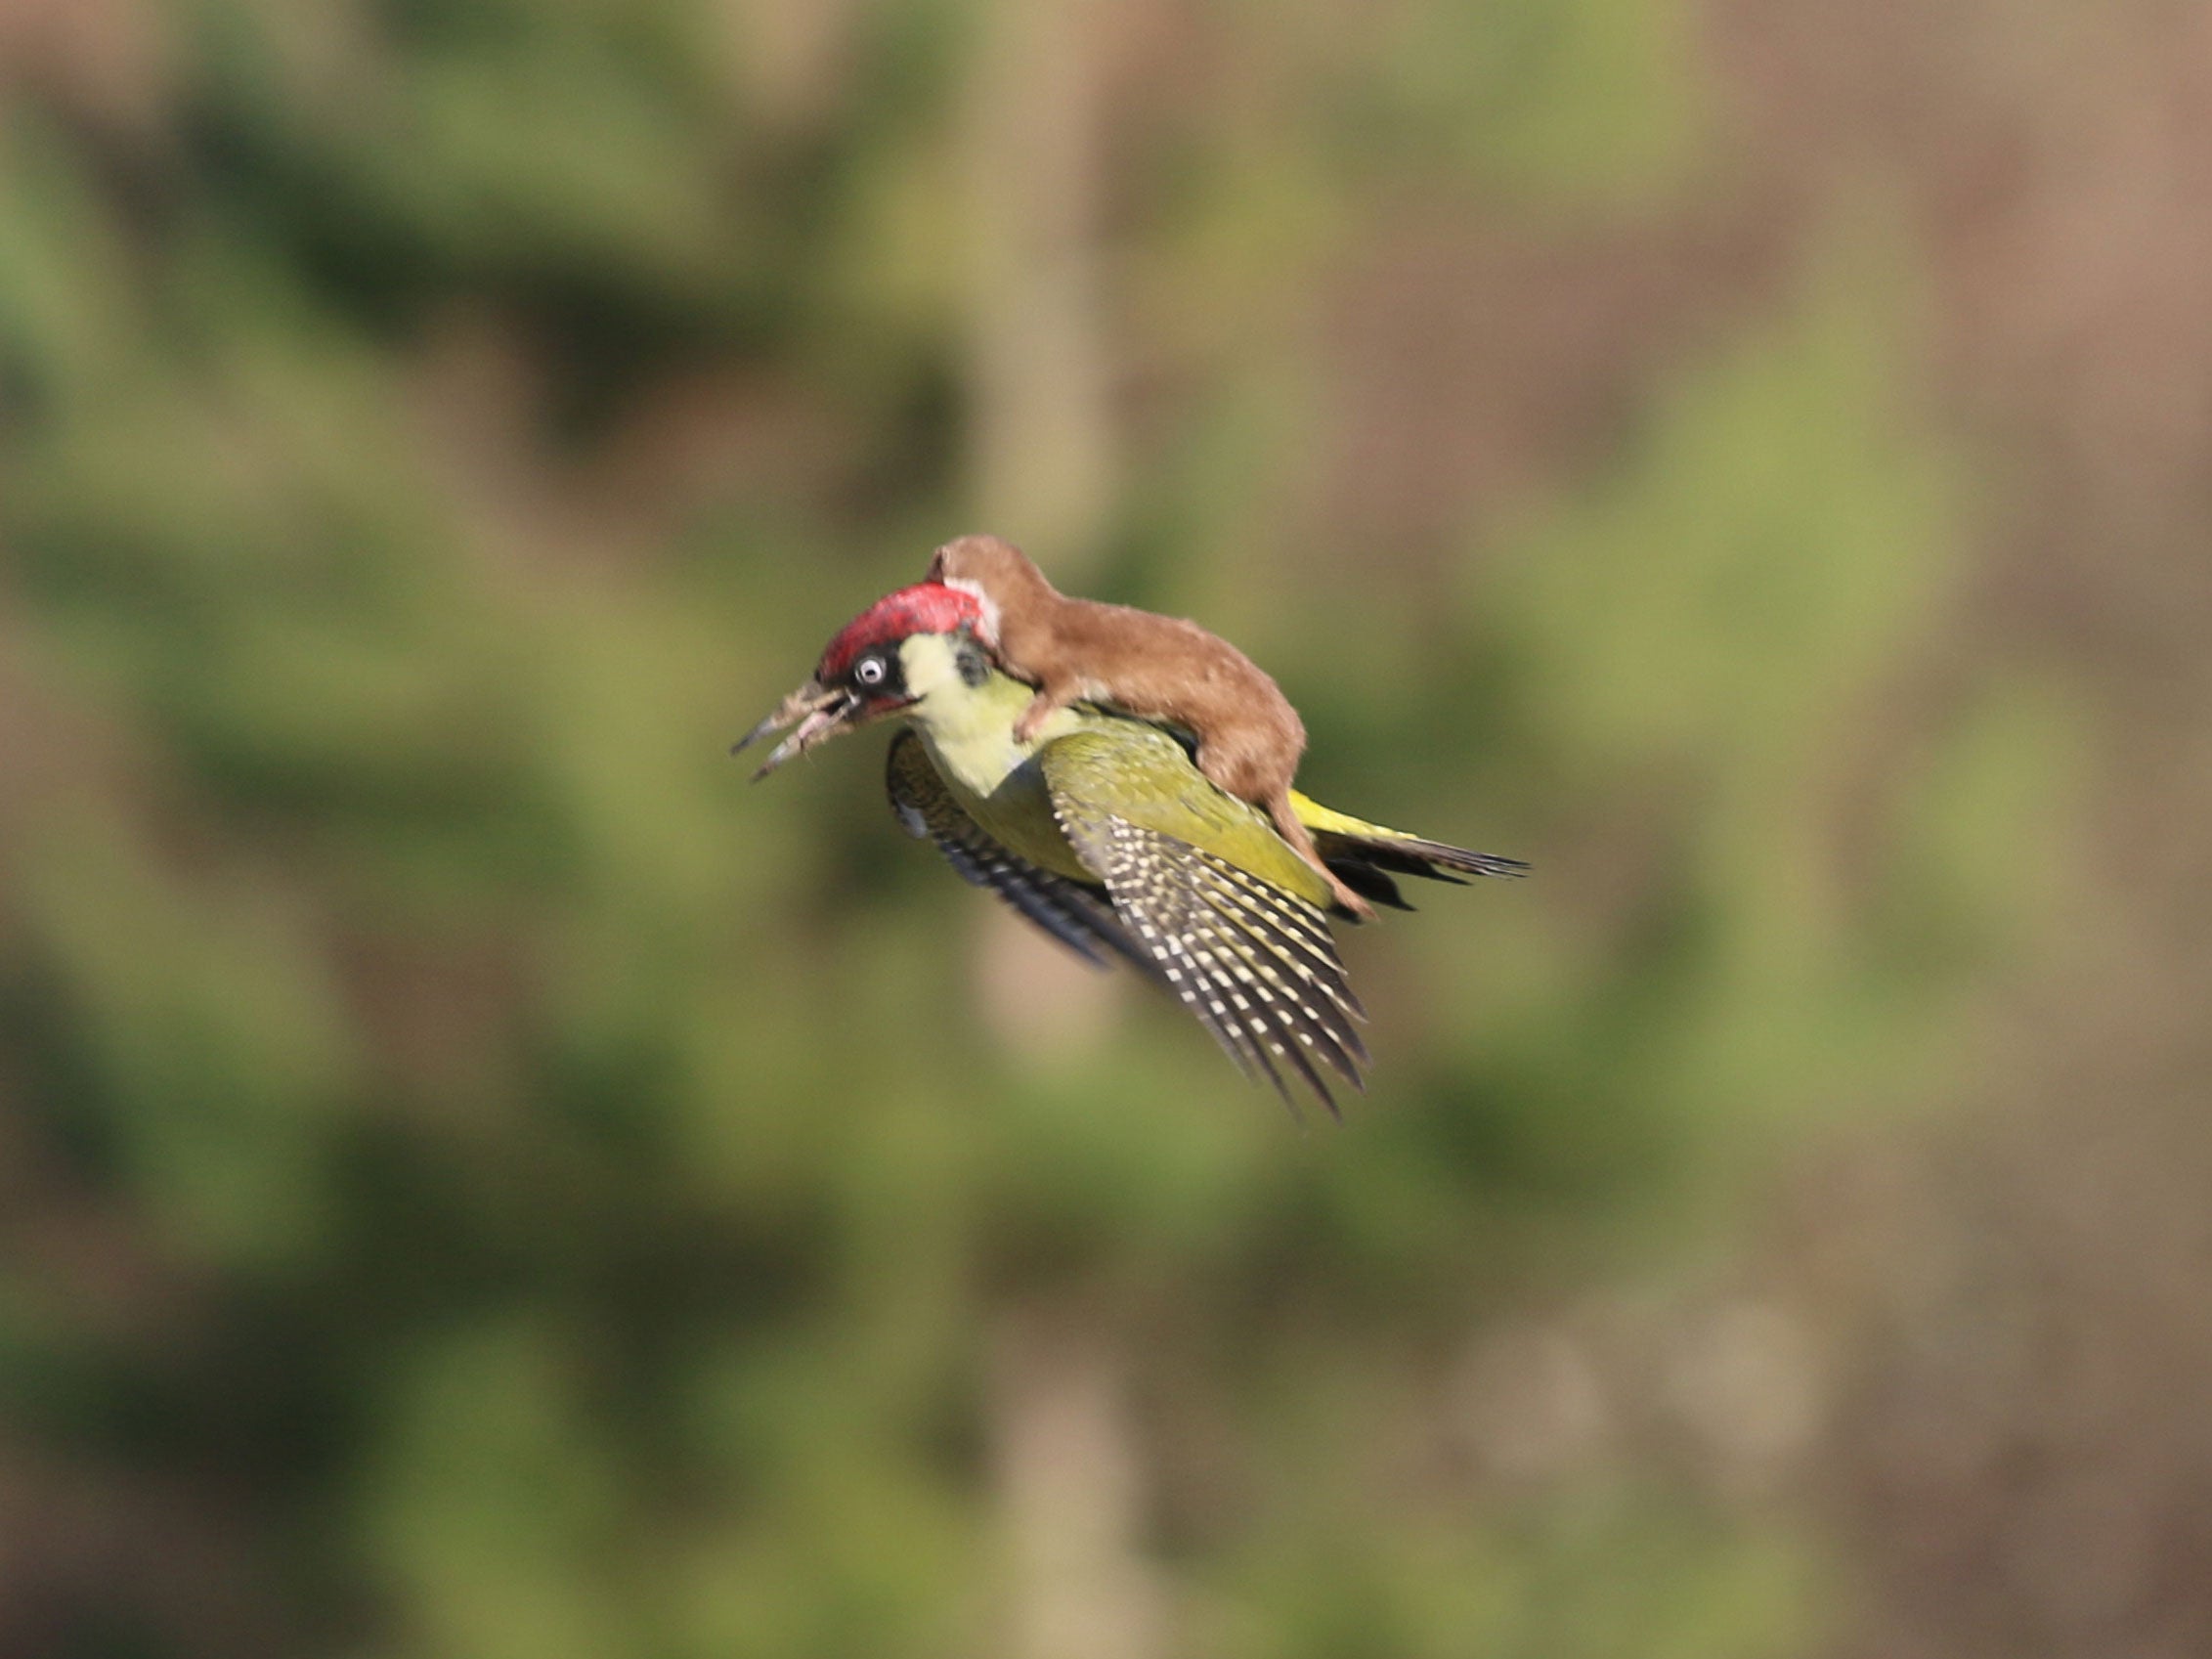 The baby weasel on the back of the woodpecker